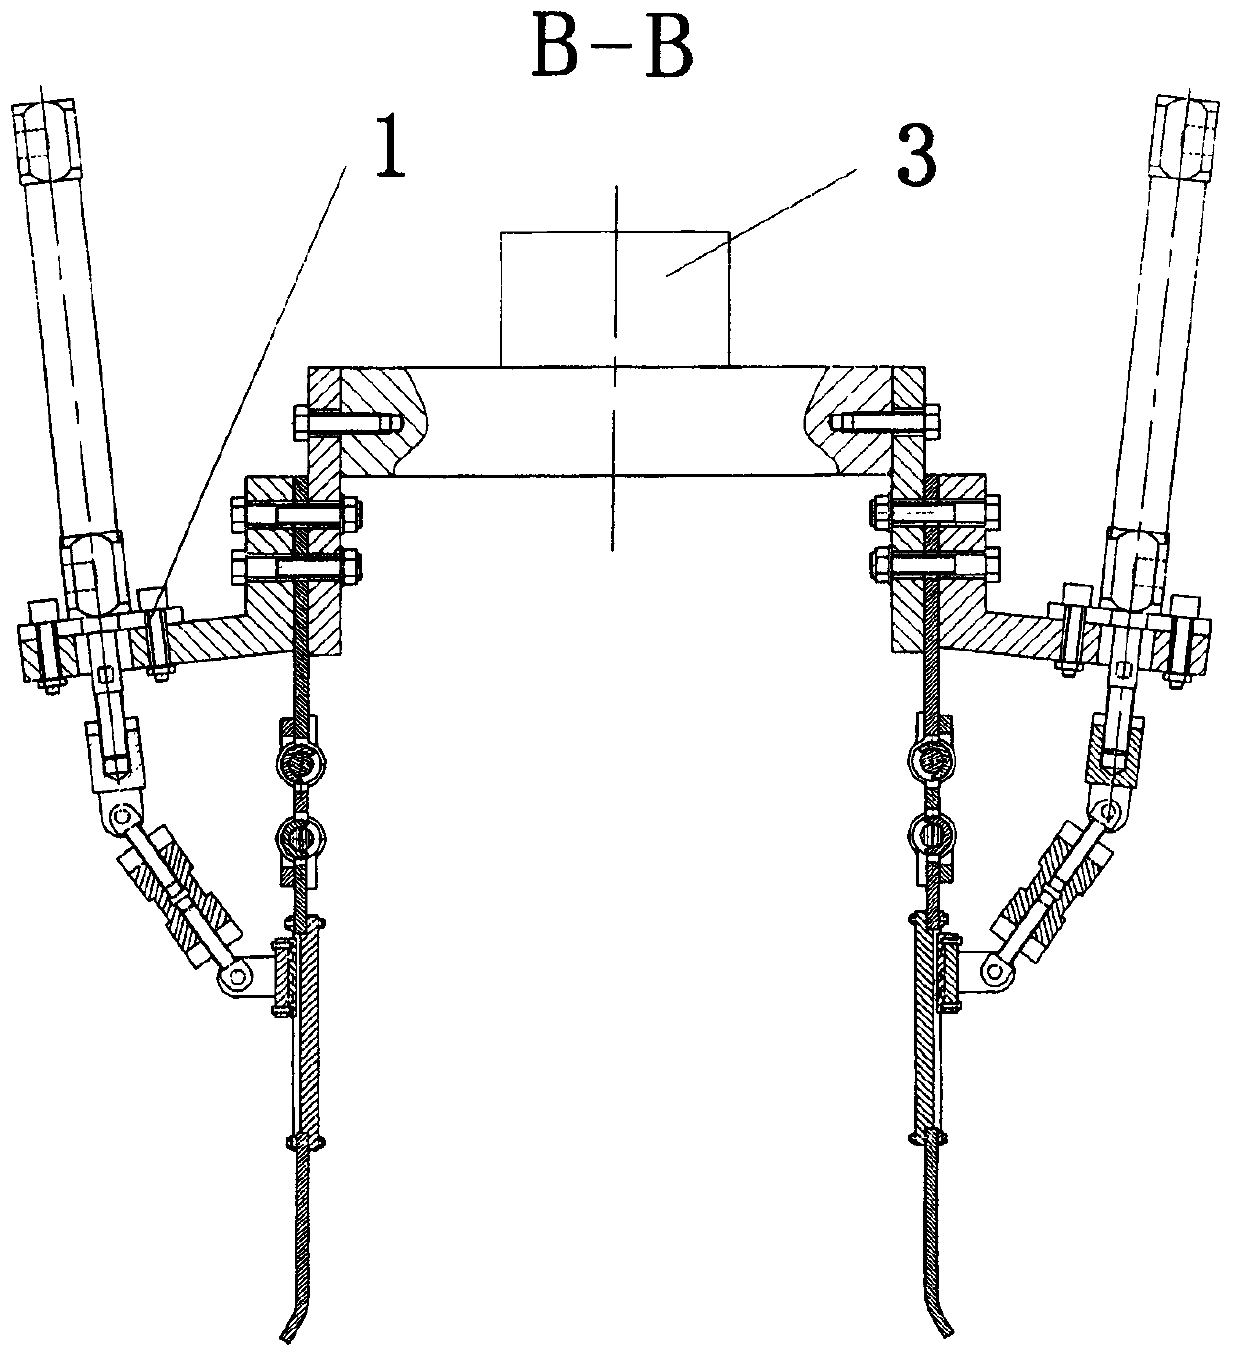 Self-locking boosting type flexible and smooth tail end gripper for serial connection loose hinge